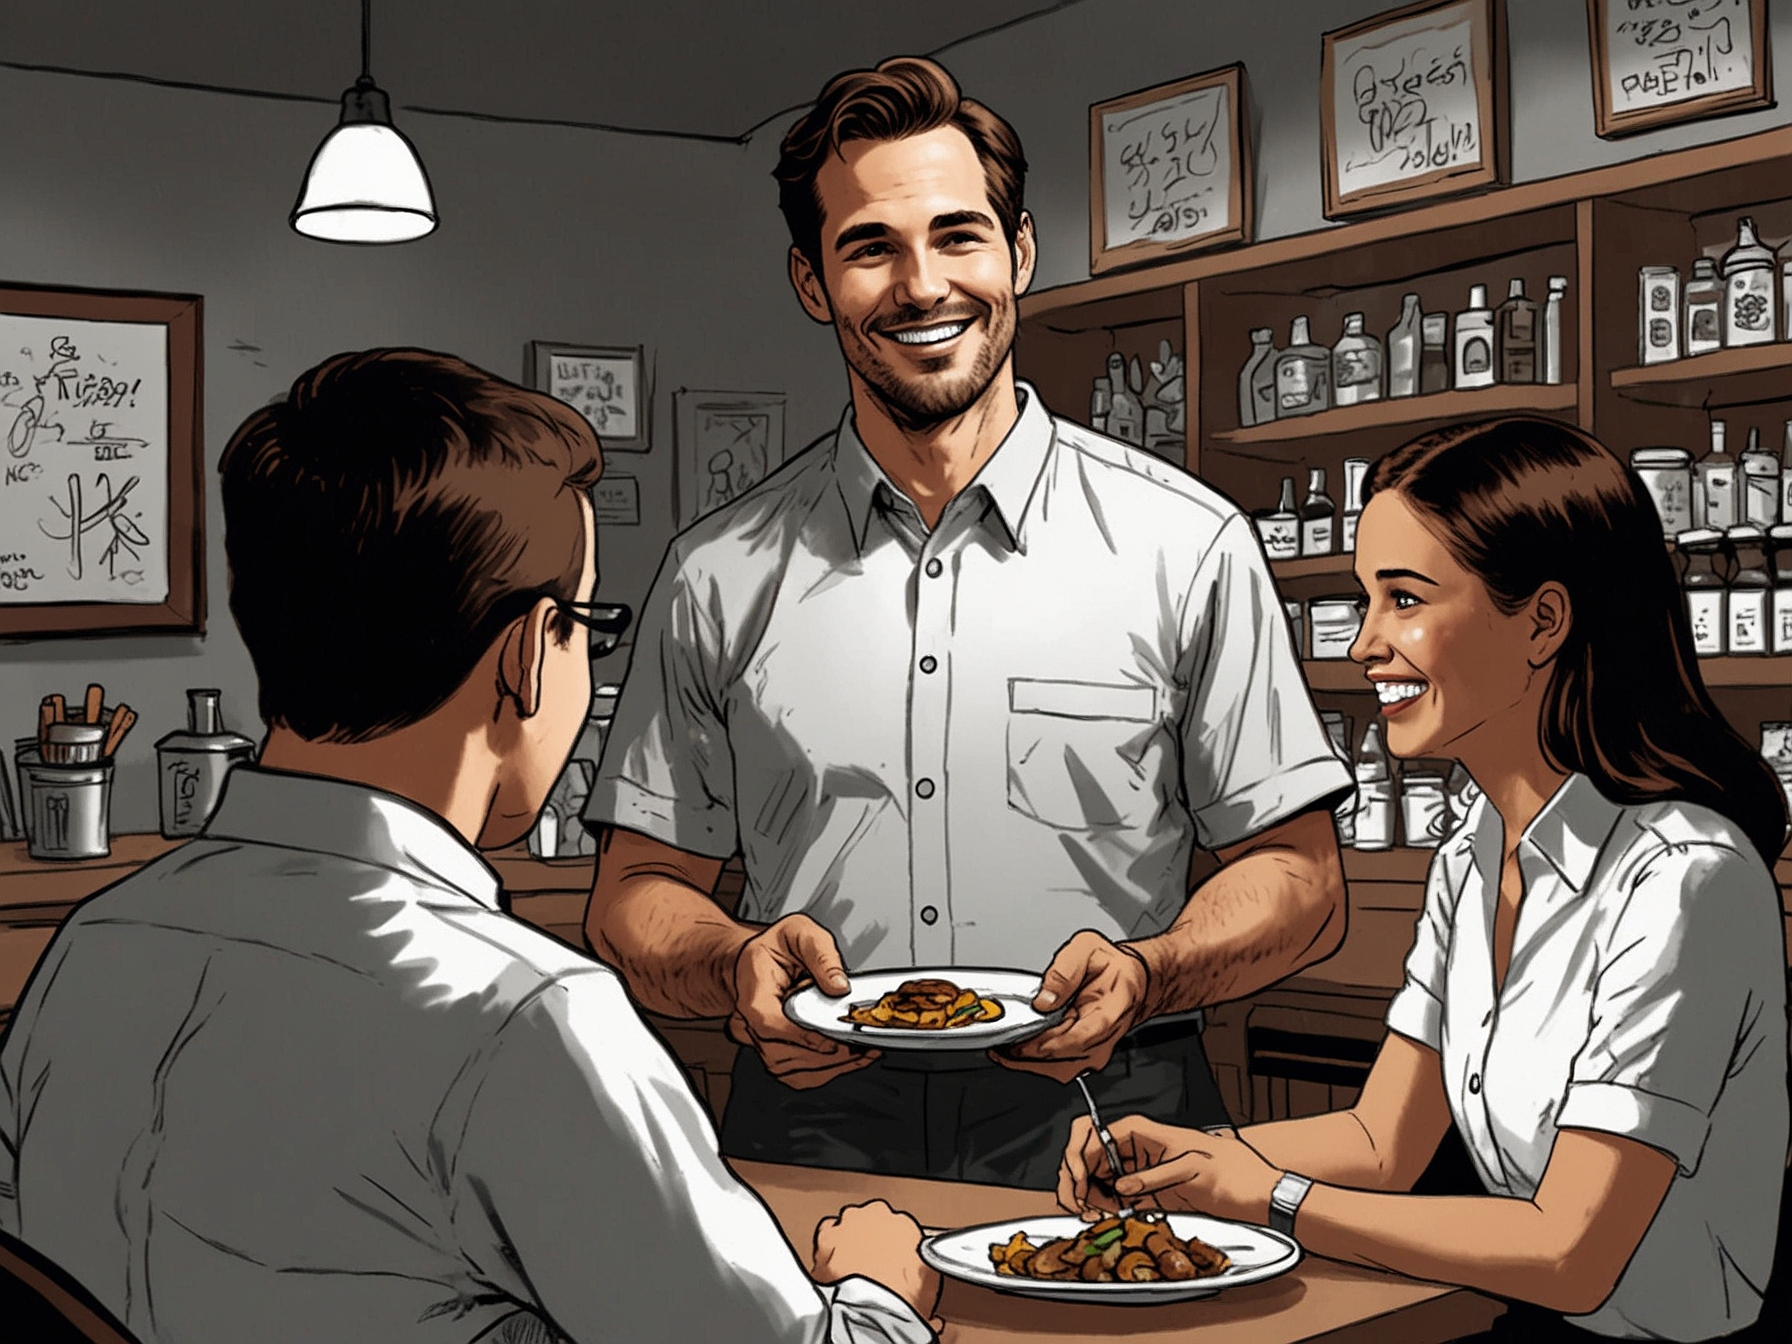 A restaurant server happily receives tips from customers. Making tips tax-free could significantly increase their take-home pay and improve financial security for service workers.